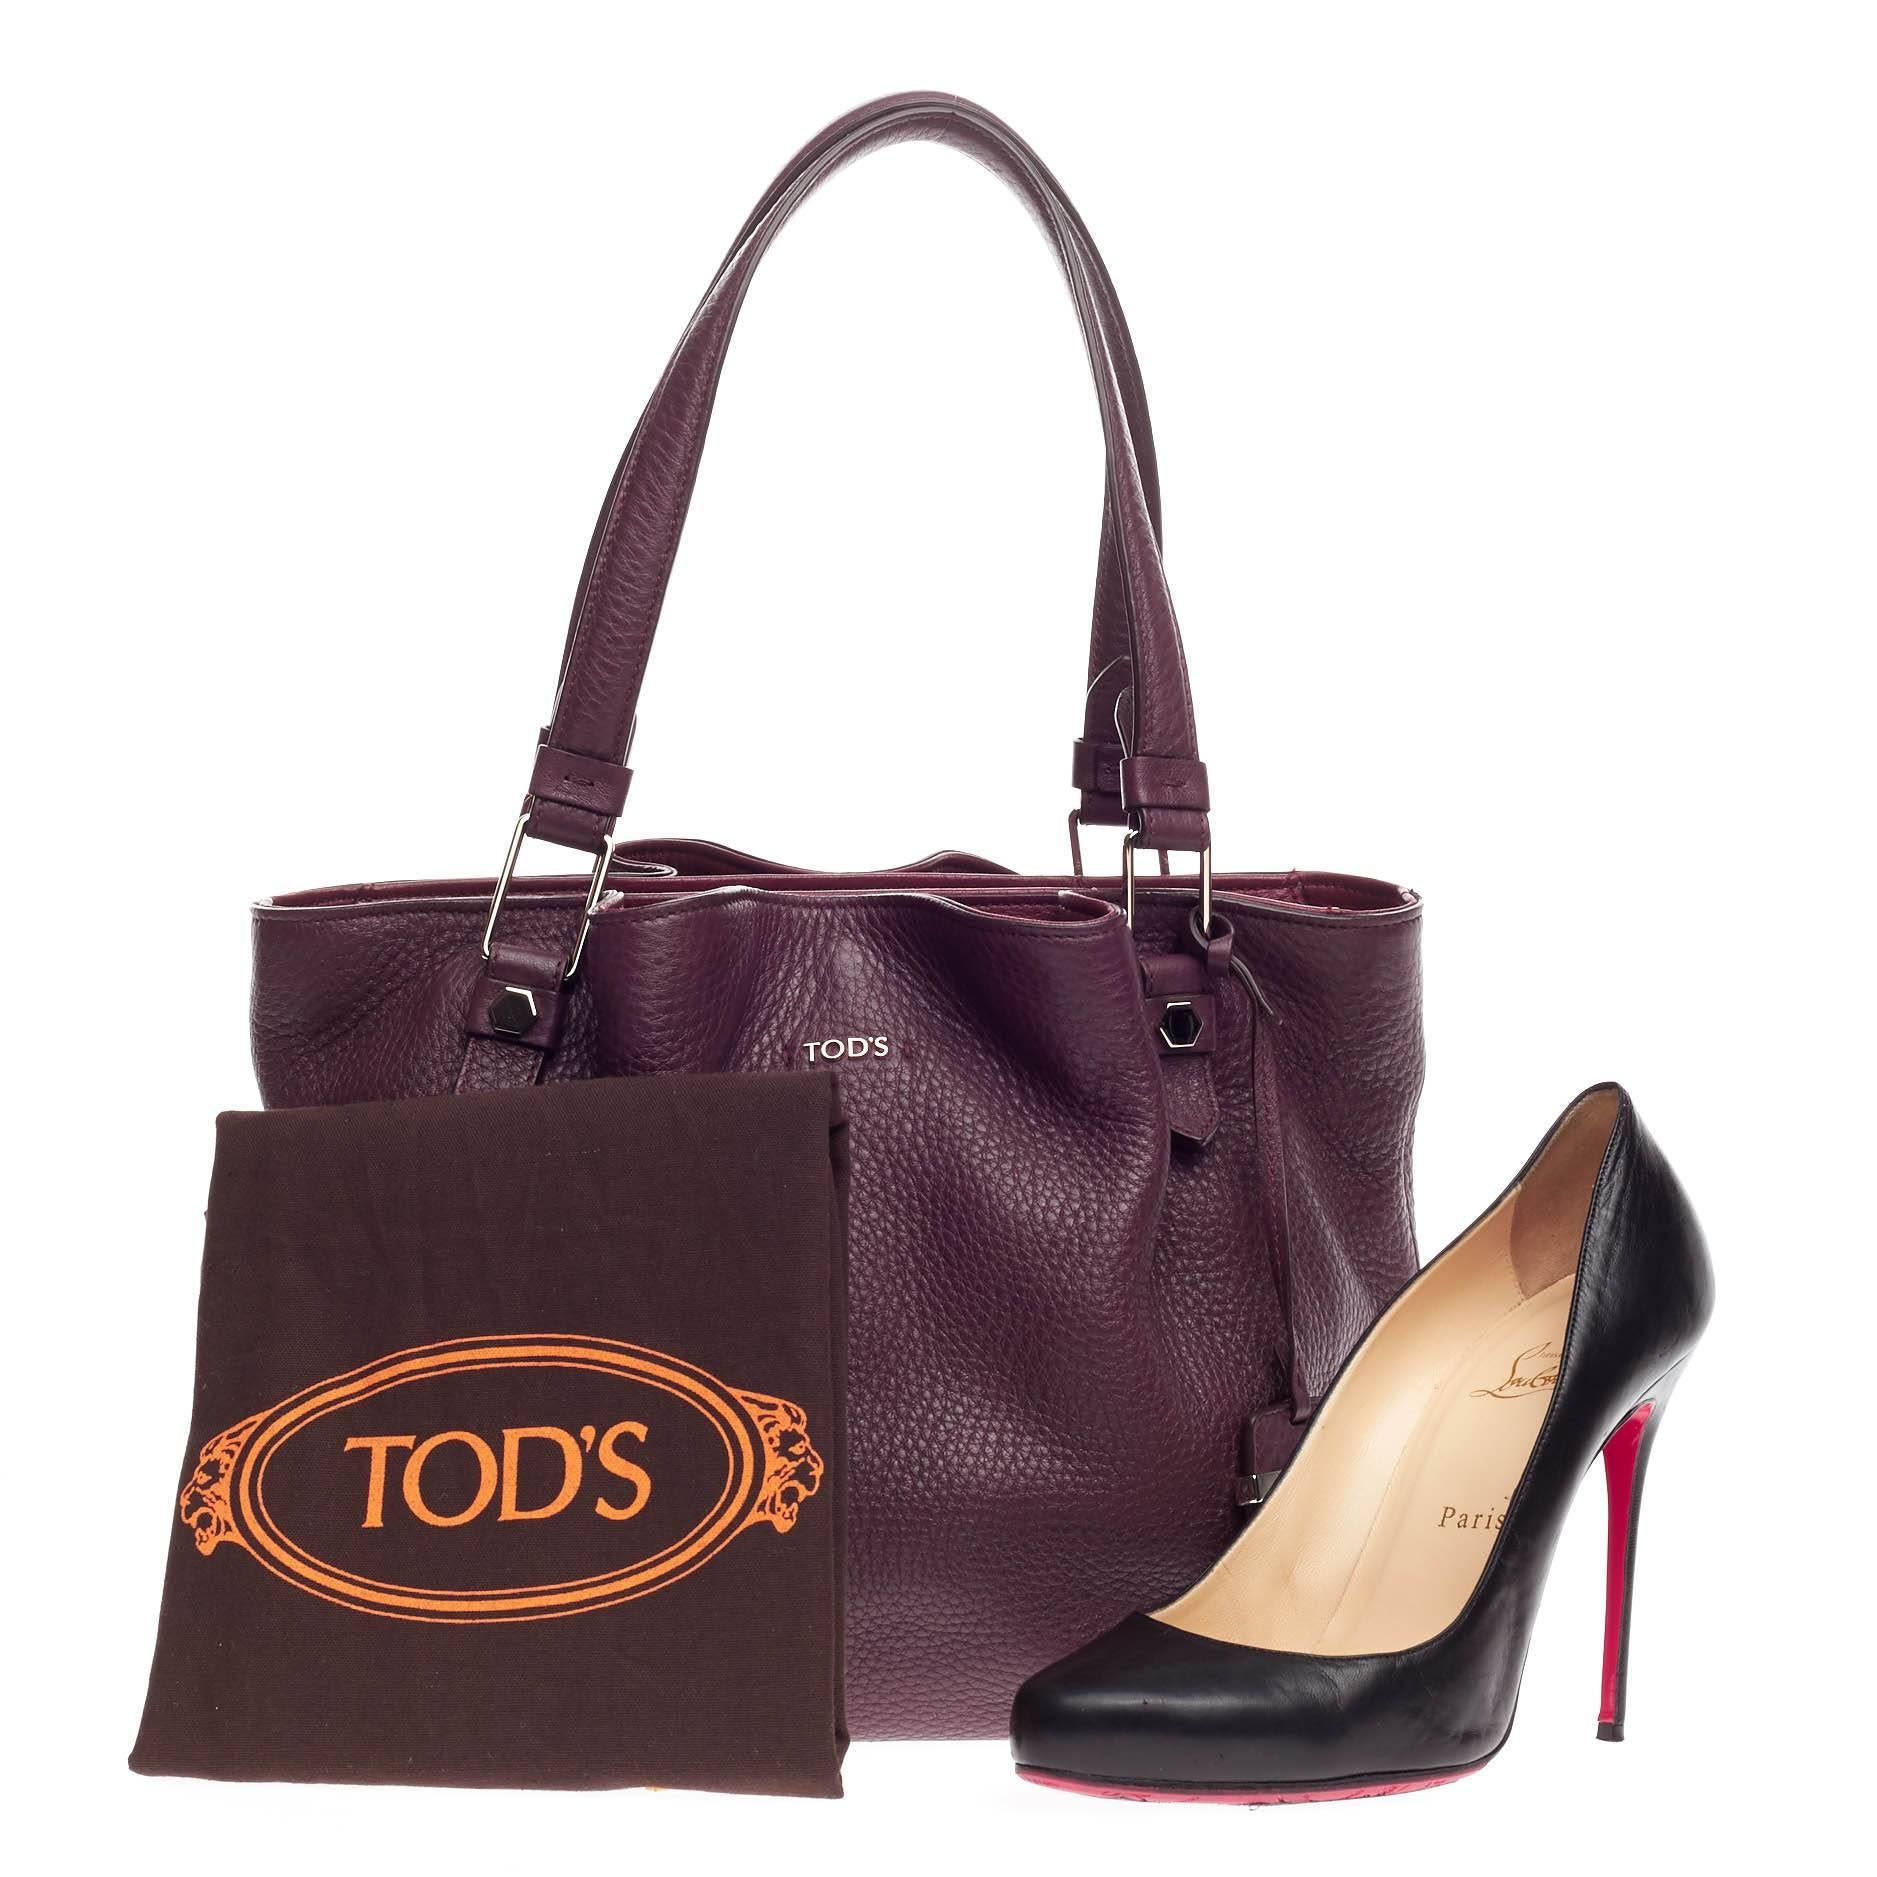 This authentic Tod's Flower Bag Leather Medium released in the brand's 2014 Collection mixes casual luxury with the brand's understated elegance. Crafted in supple purple leather, this no-fuss, sophisticated tote features dual-flat leather handles,